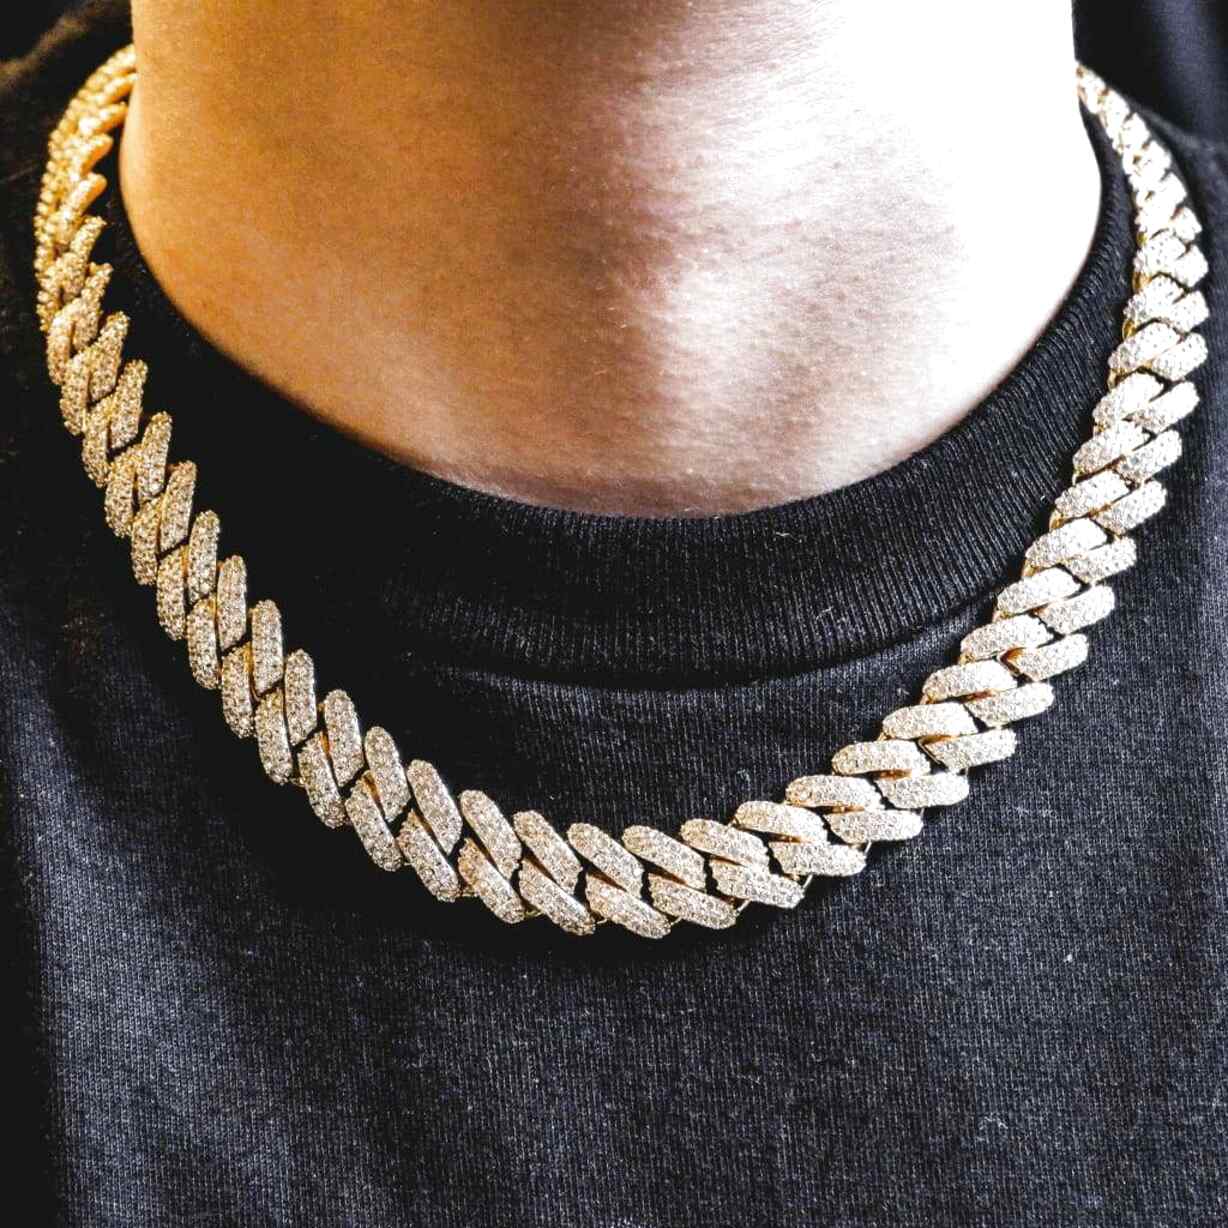 Cuban Chain for sale in UK | 78 used Cuban Chains